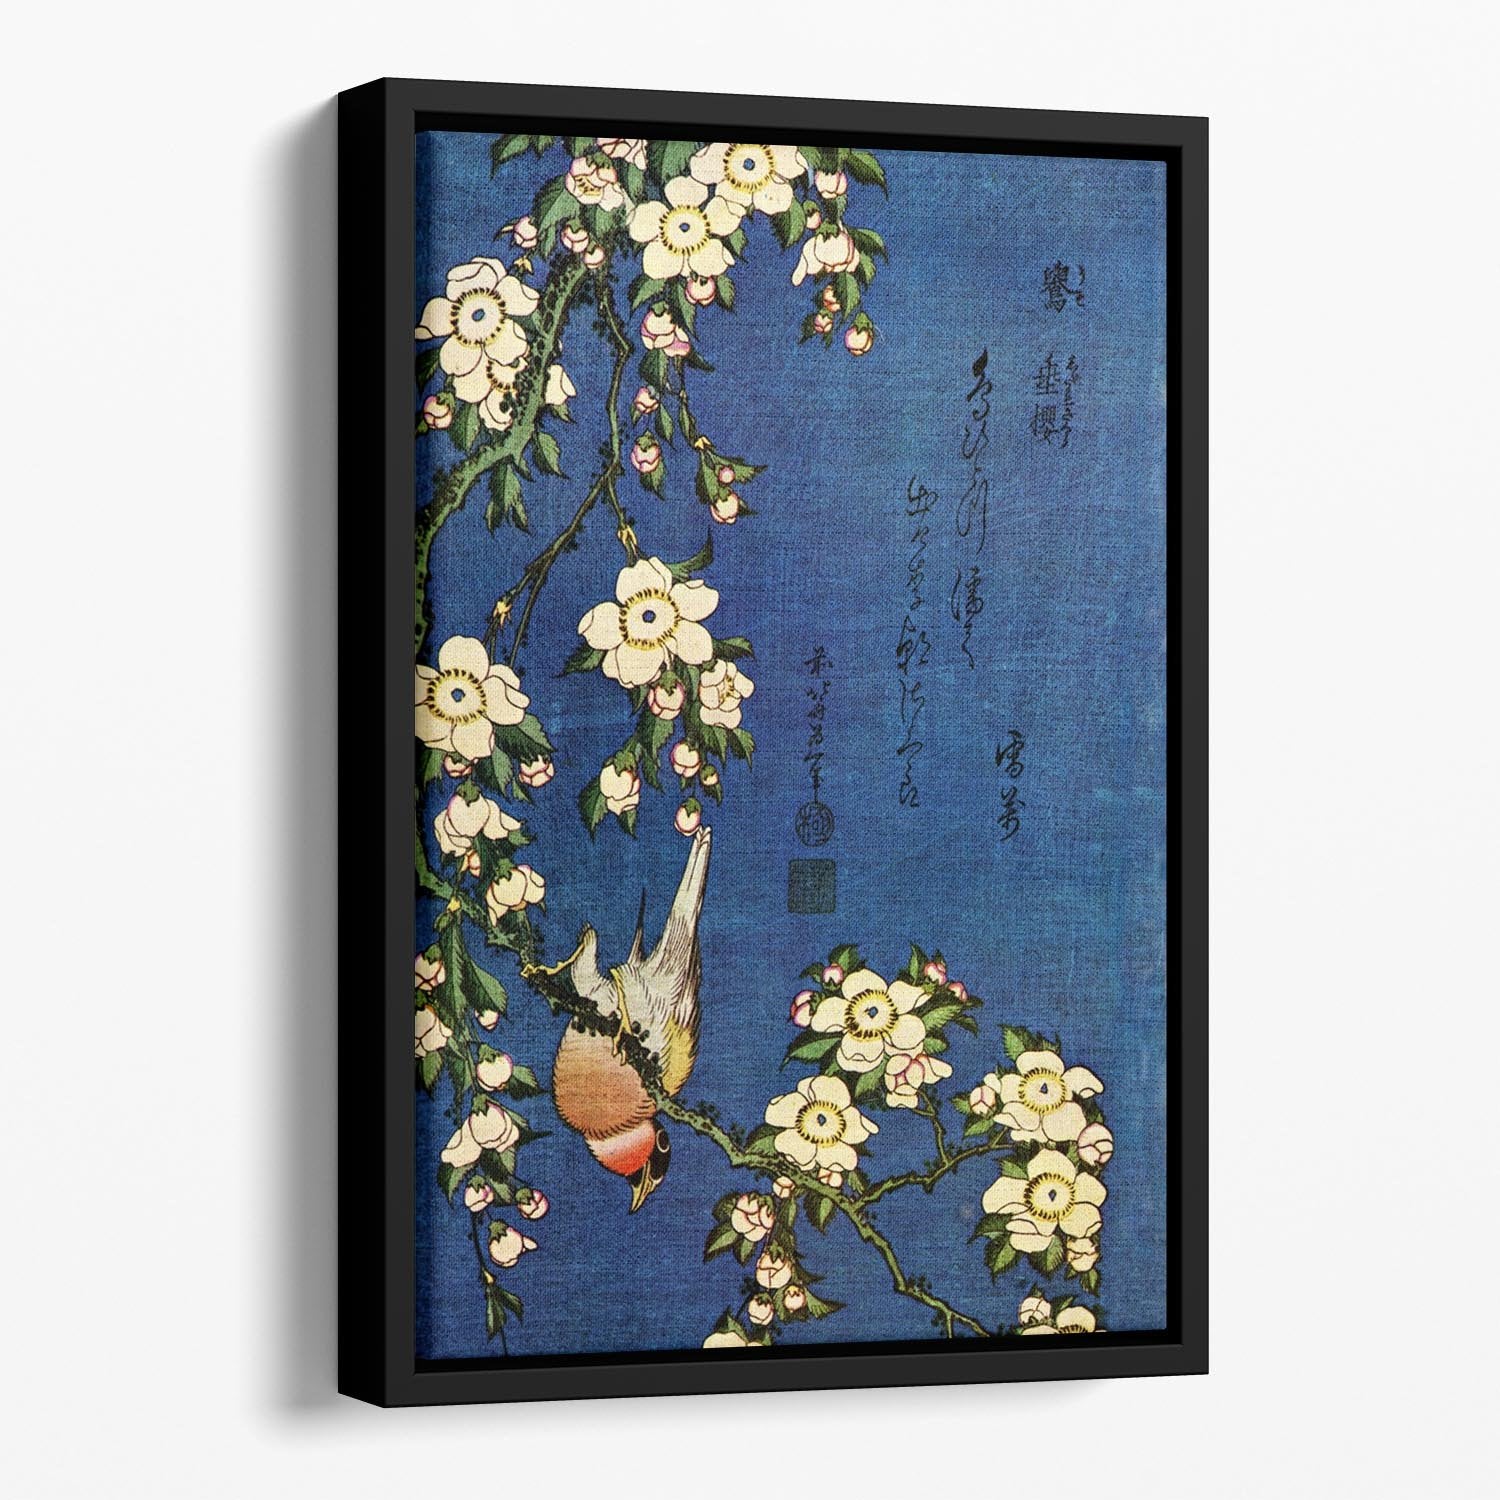 Bullfinch and drooping cherry by Hokusai Floating Framed Canvas